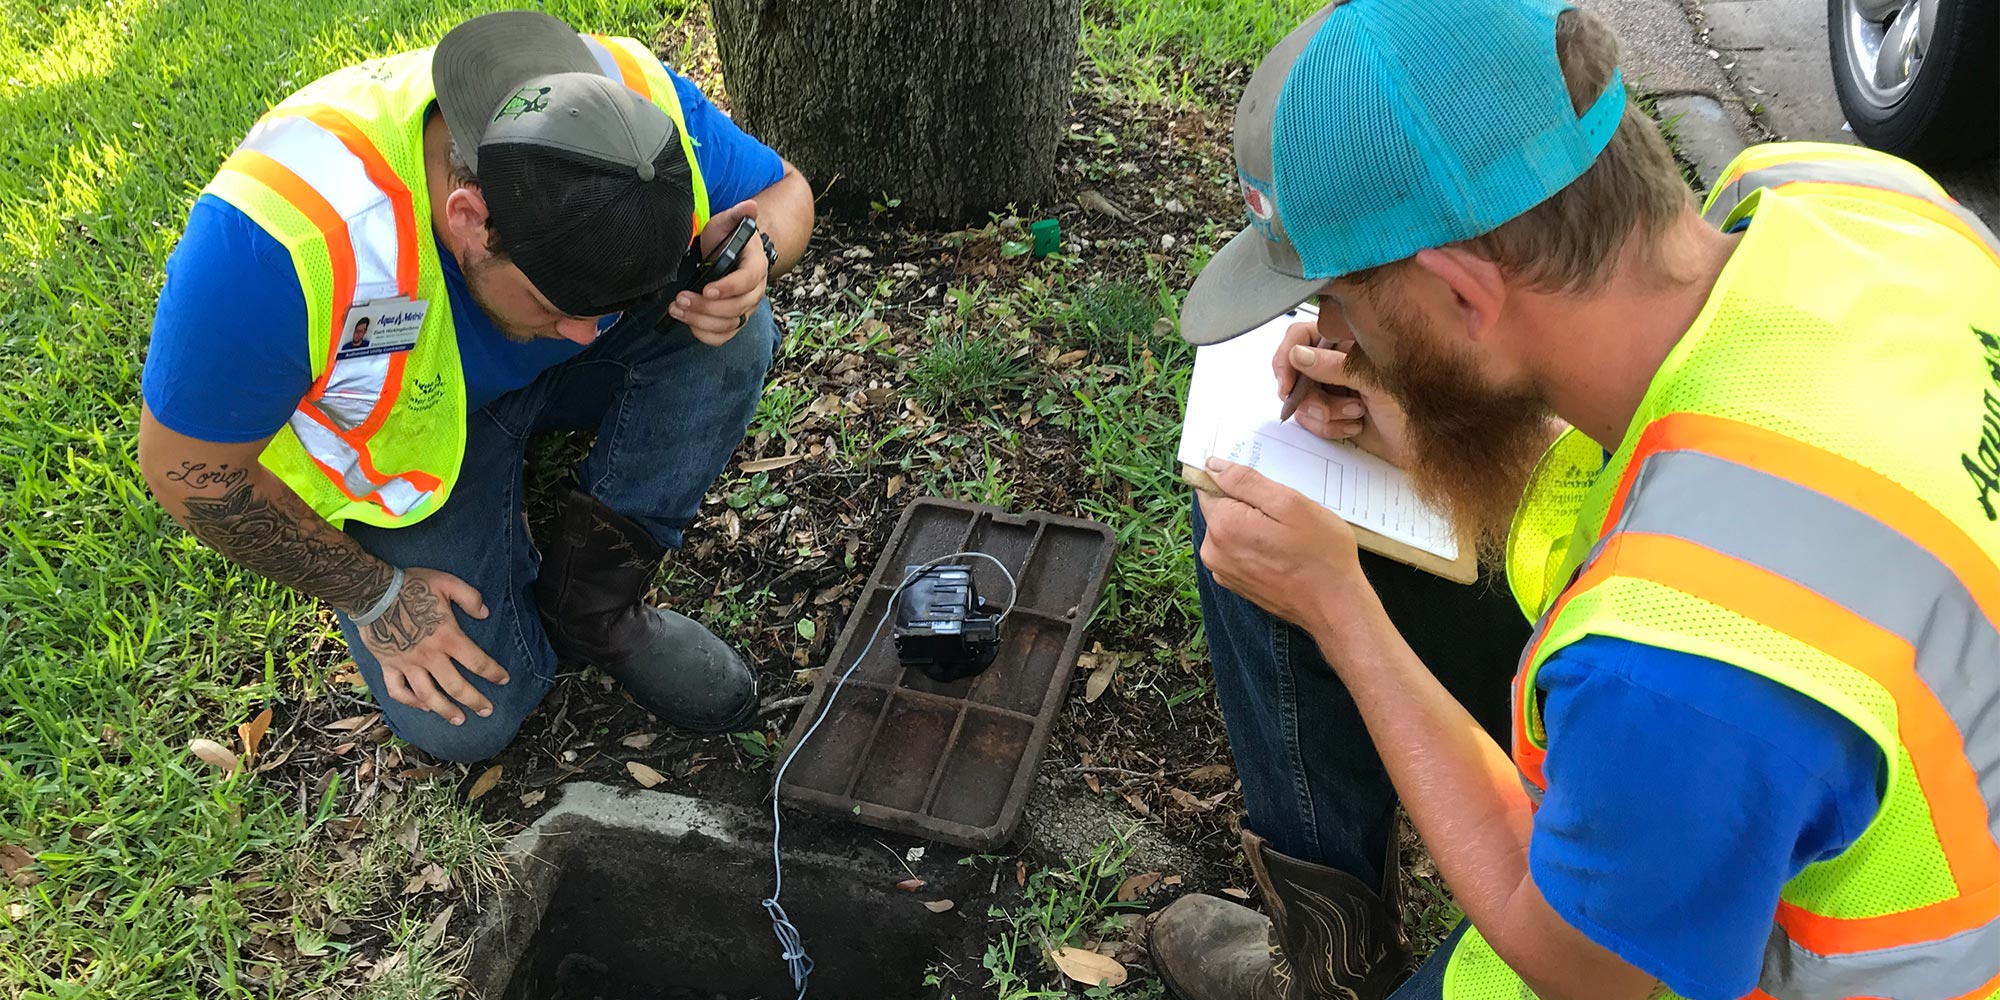 Water utility employees evaluate a water meter. Photo courtesy of the City of Fort Worth Water Department.